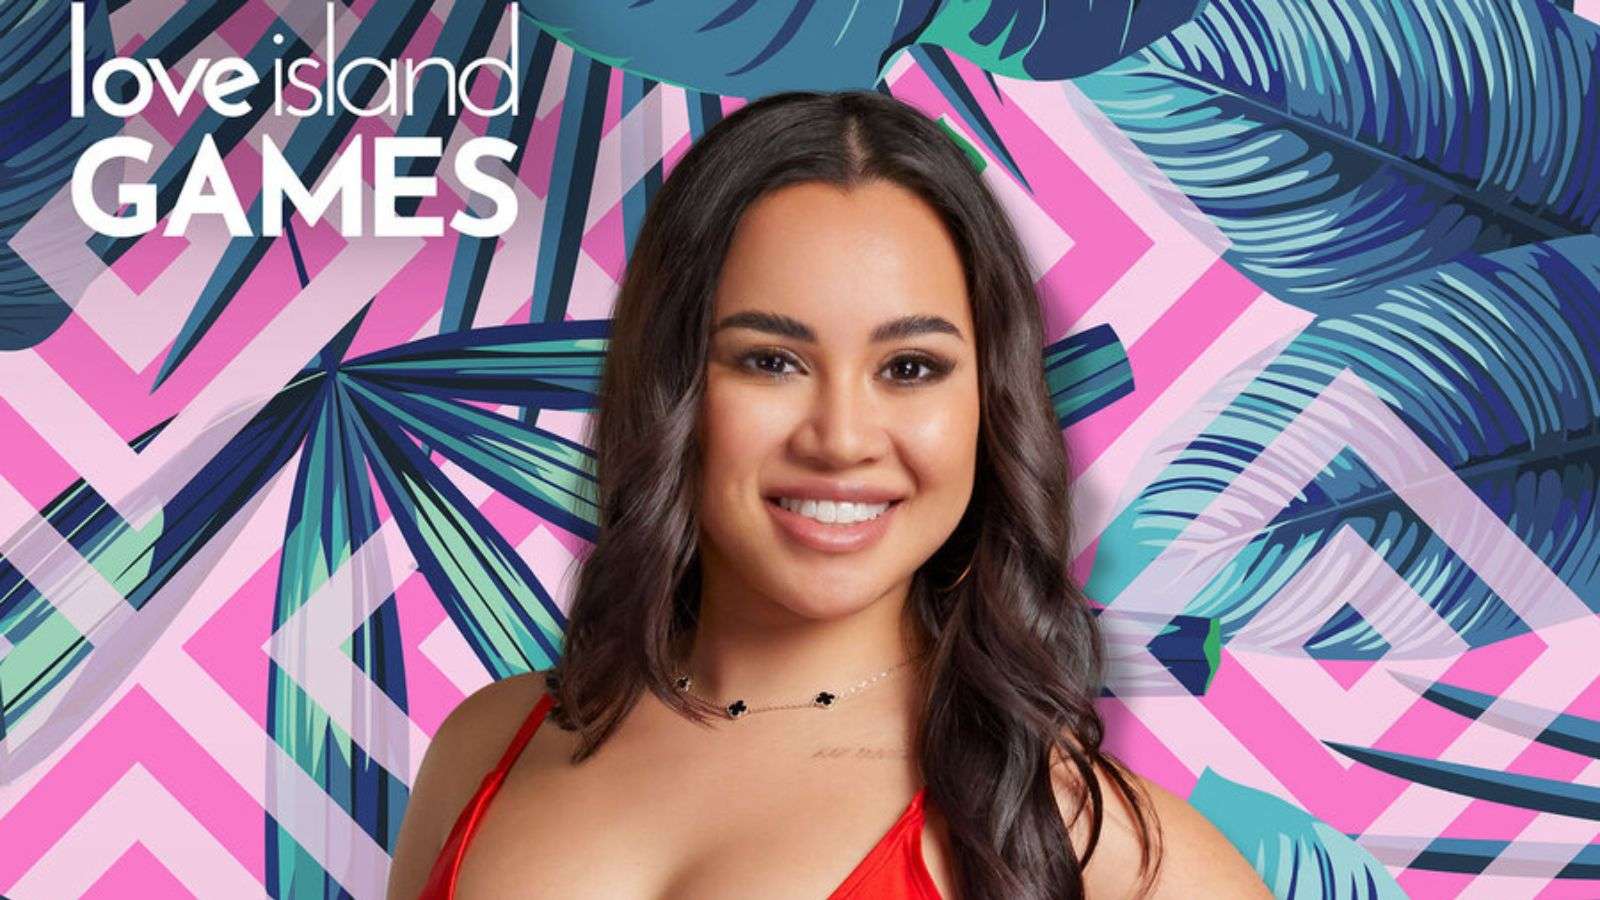 Jess from Love Island Games